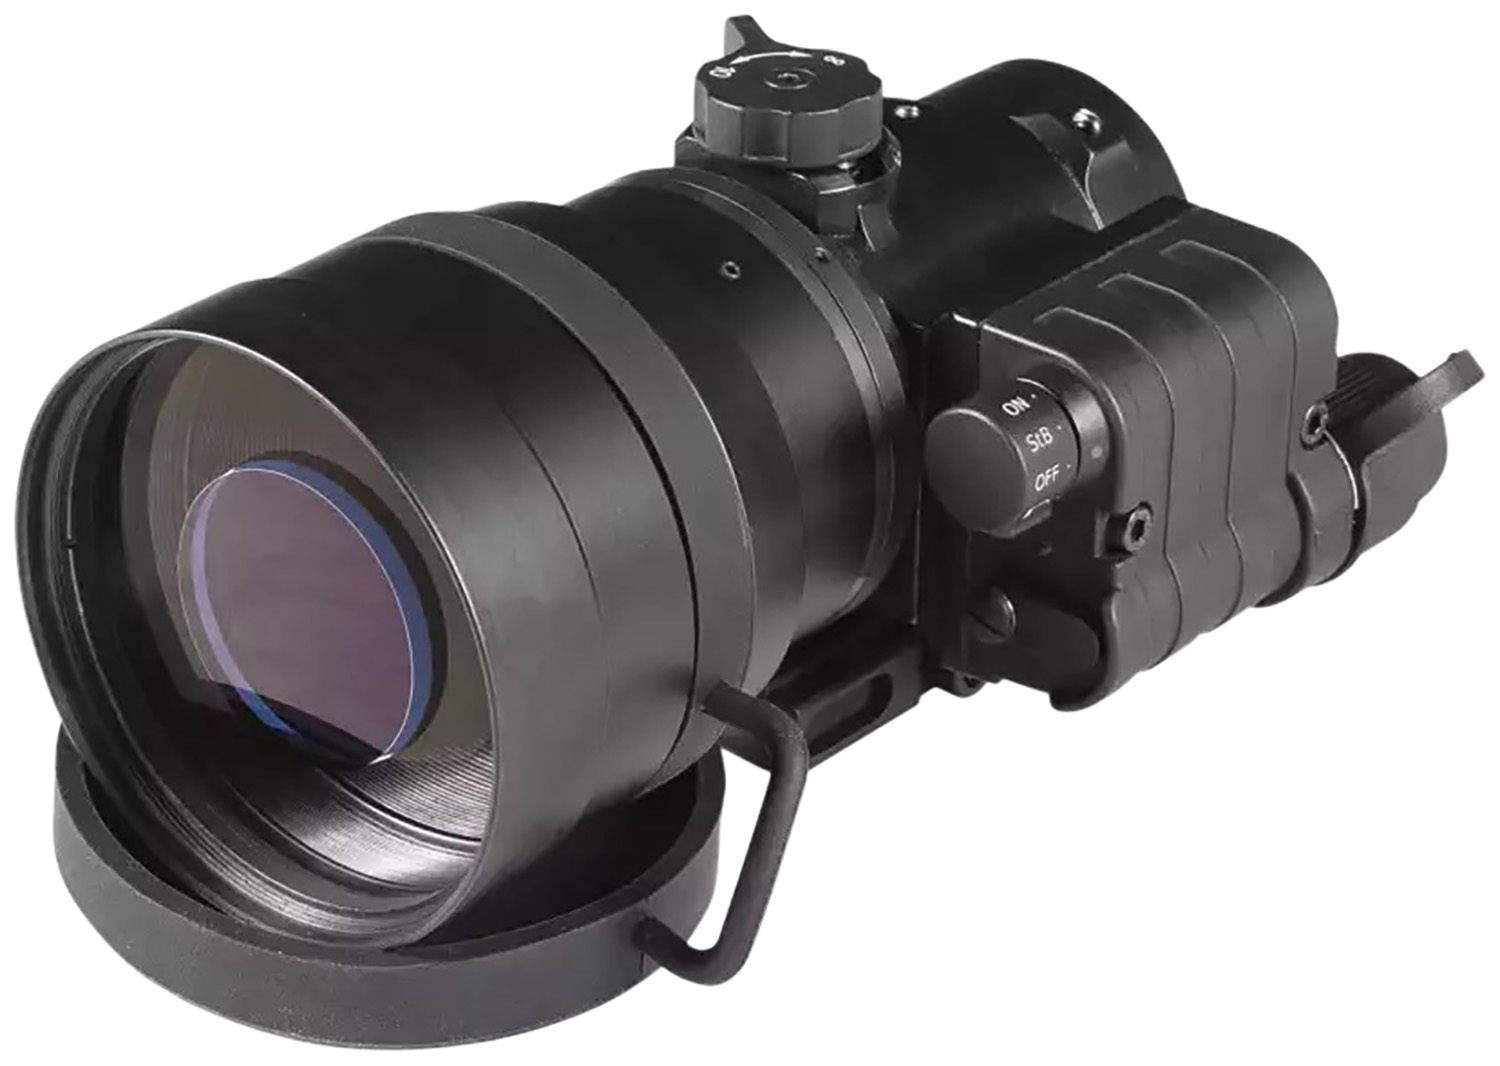 AGM Global Vision 16CO2123284111 Comanche-22 3AW1 Night Vision Rifle Scope Black Unity 1x80mm Gen 3 Auto-Gated Level 1